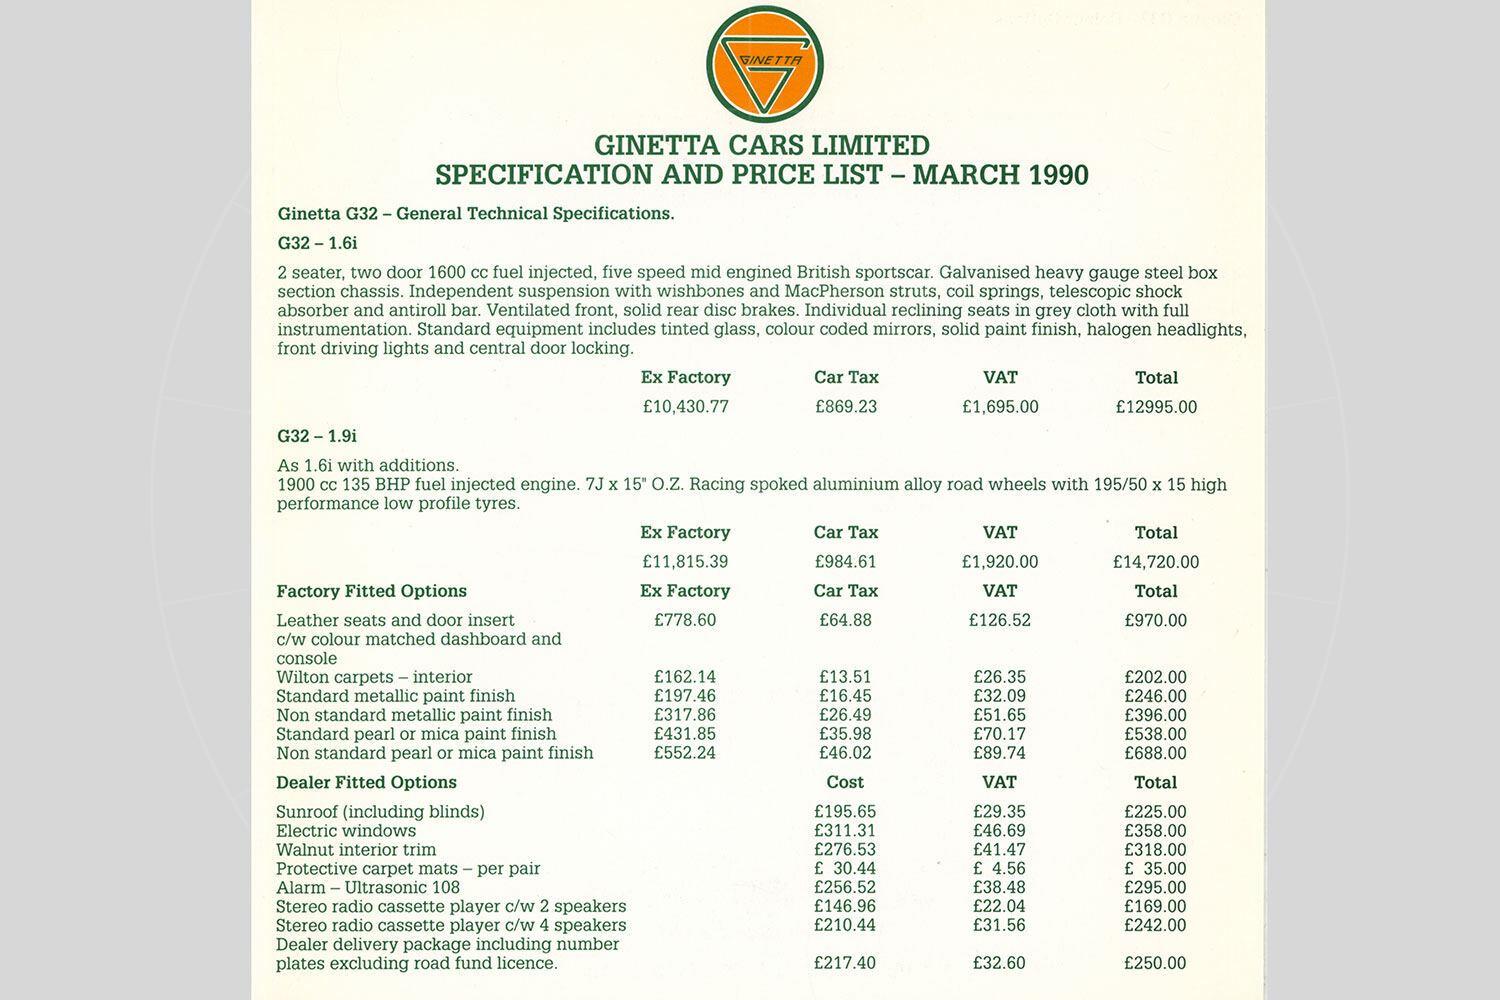 The Ginetta G32 price list in March 1990 Pic: magiccarpics.co.uk | The Ginetta G32 price list in March 1990